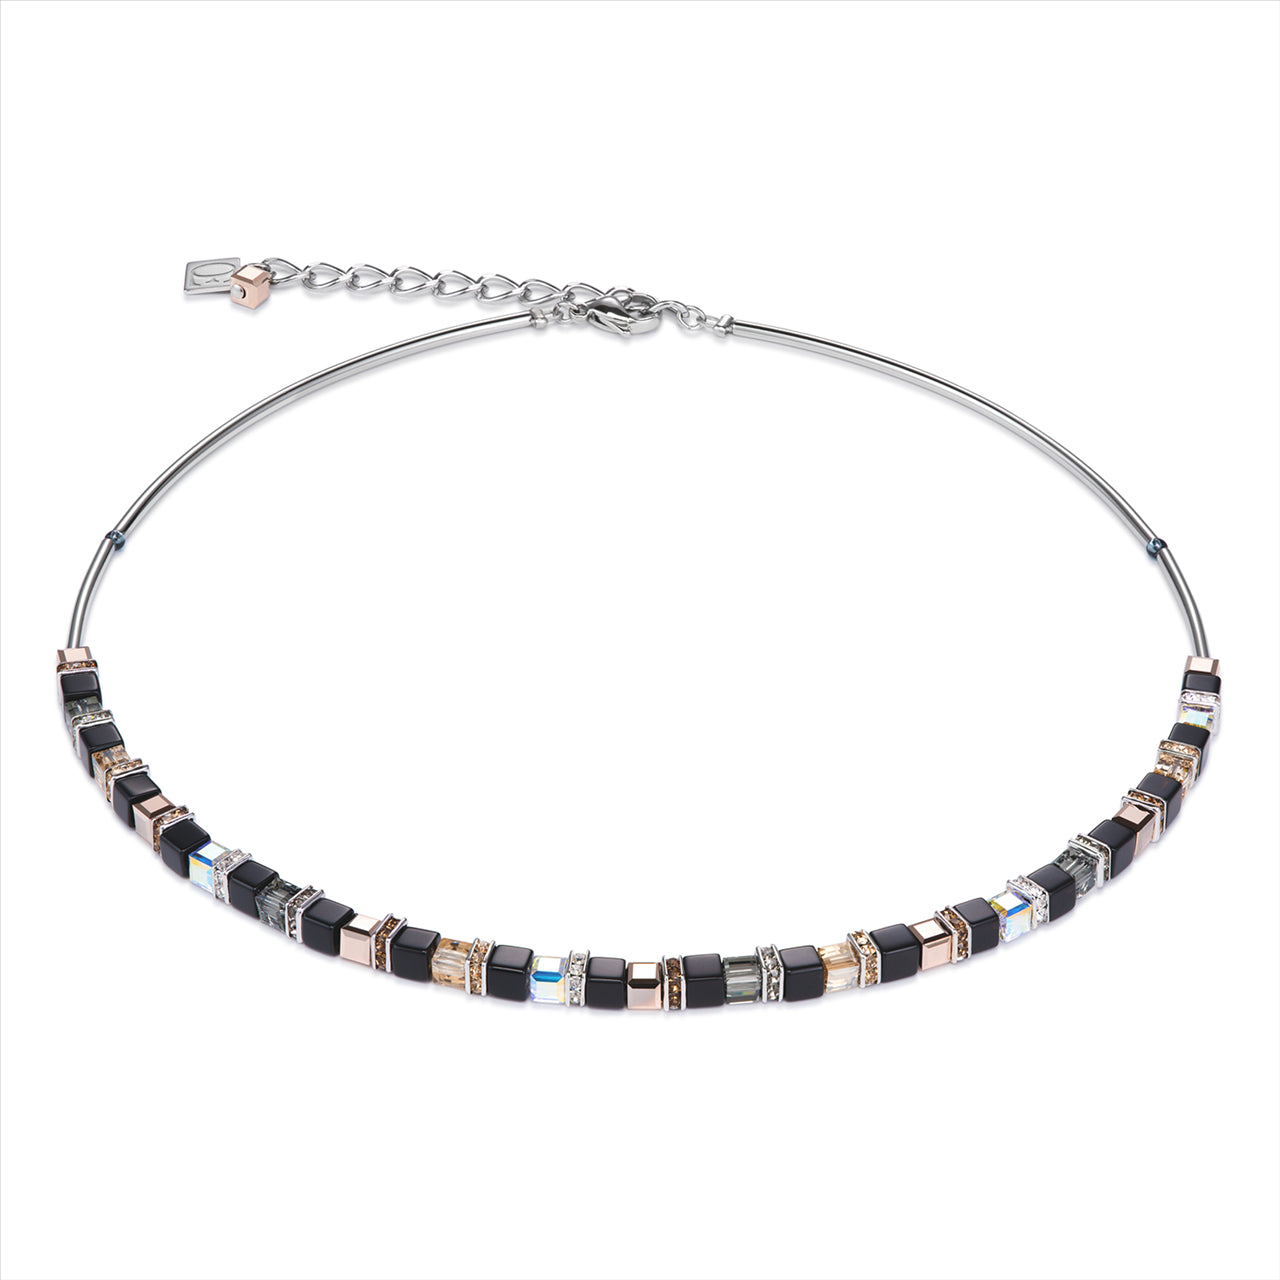 CDL - Stainless steel with glass, multi natural coloured crystal rondelles & Swarovski crystals